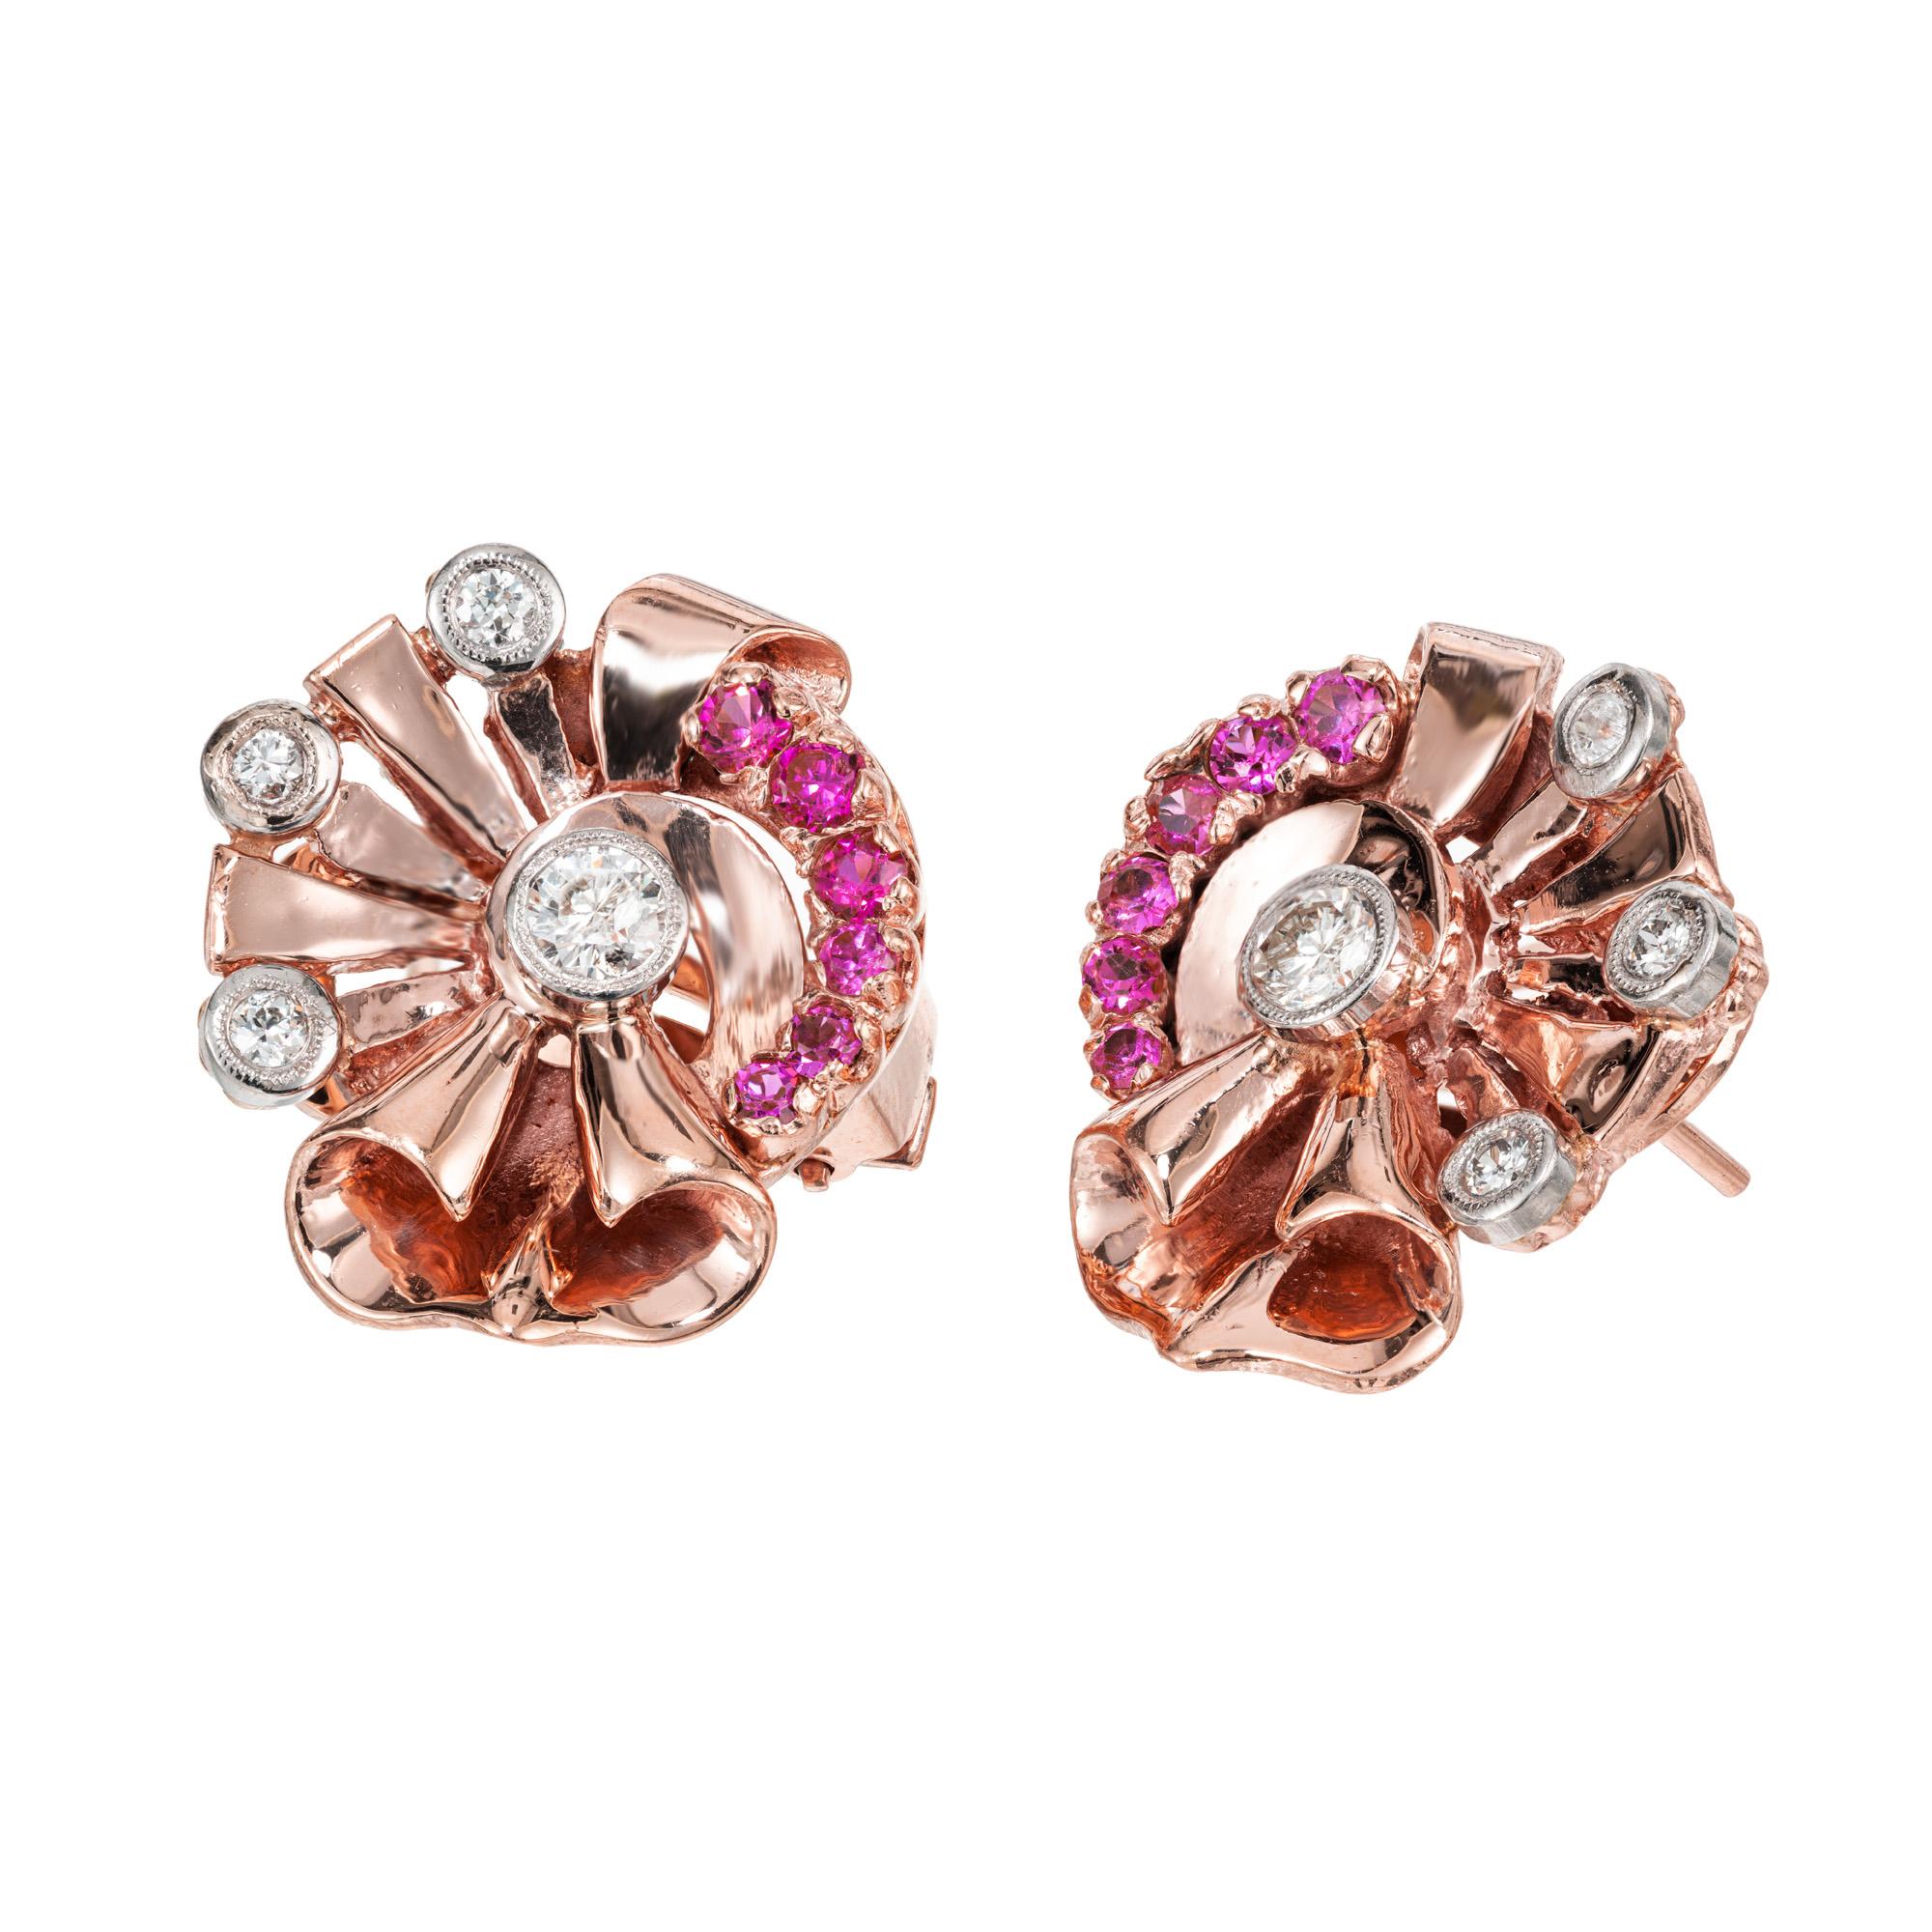 Late Art Deco sapphire and diamond earrings. Hailing from the late 1930's, these 14k rose gold clip post ribbon style earrings each boast 6 pink round sapphires along with 4 bezel set full cut diamonds that are encased in 14k white gold. Secure